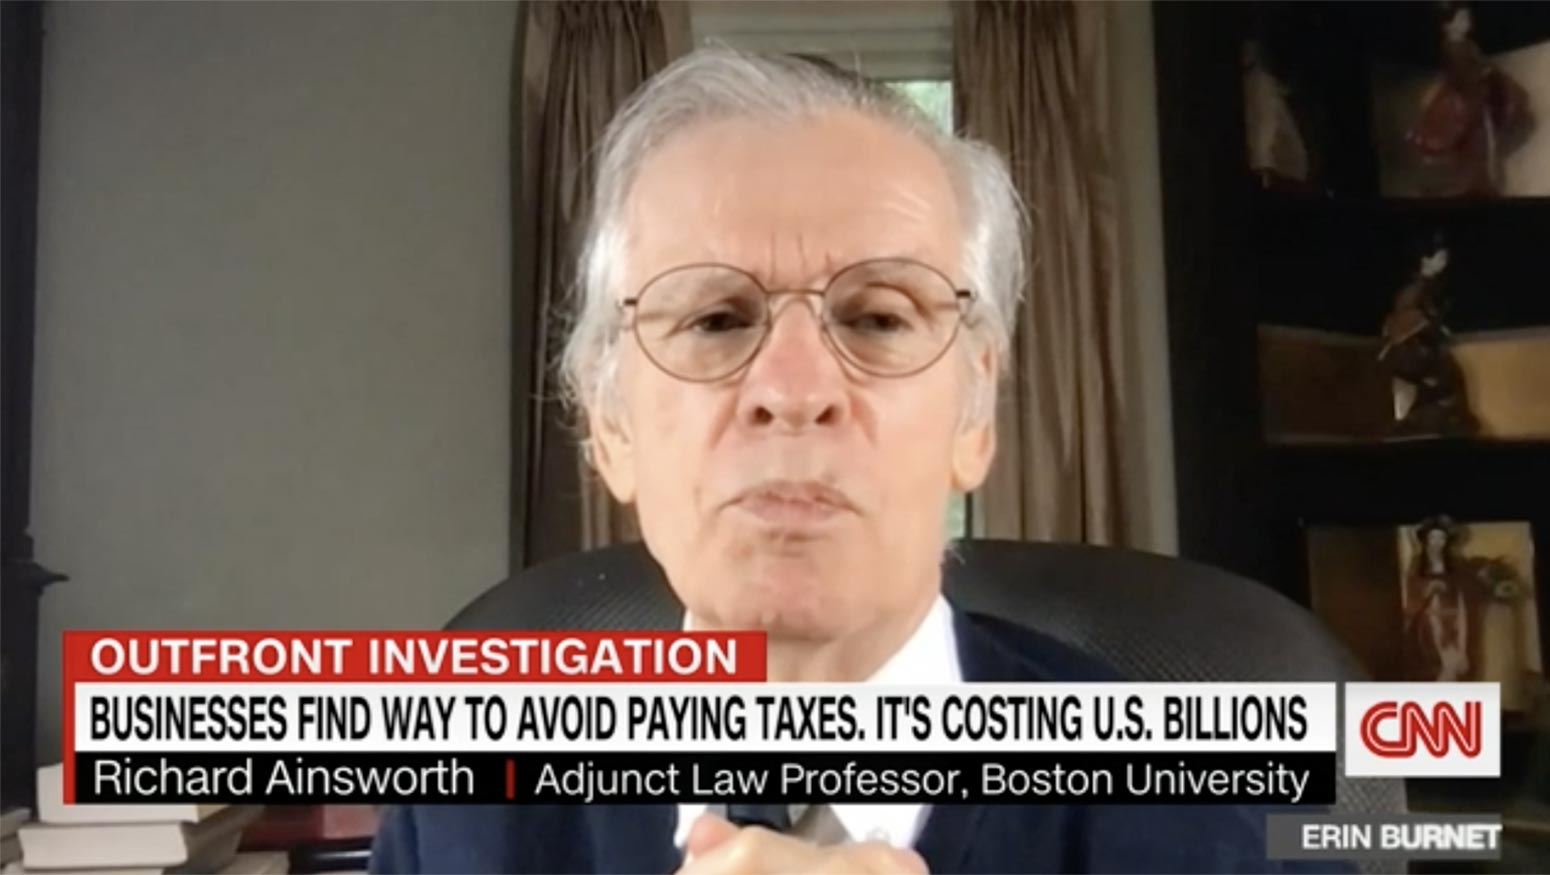 Robert Chicoine & Richard Ainsworth interviewed on CNN as part of Erin Burnett's Outfront story on tax suppression software.